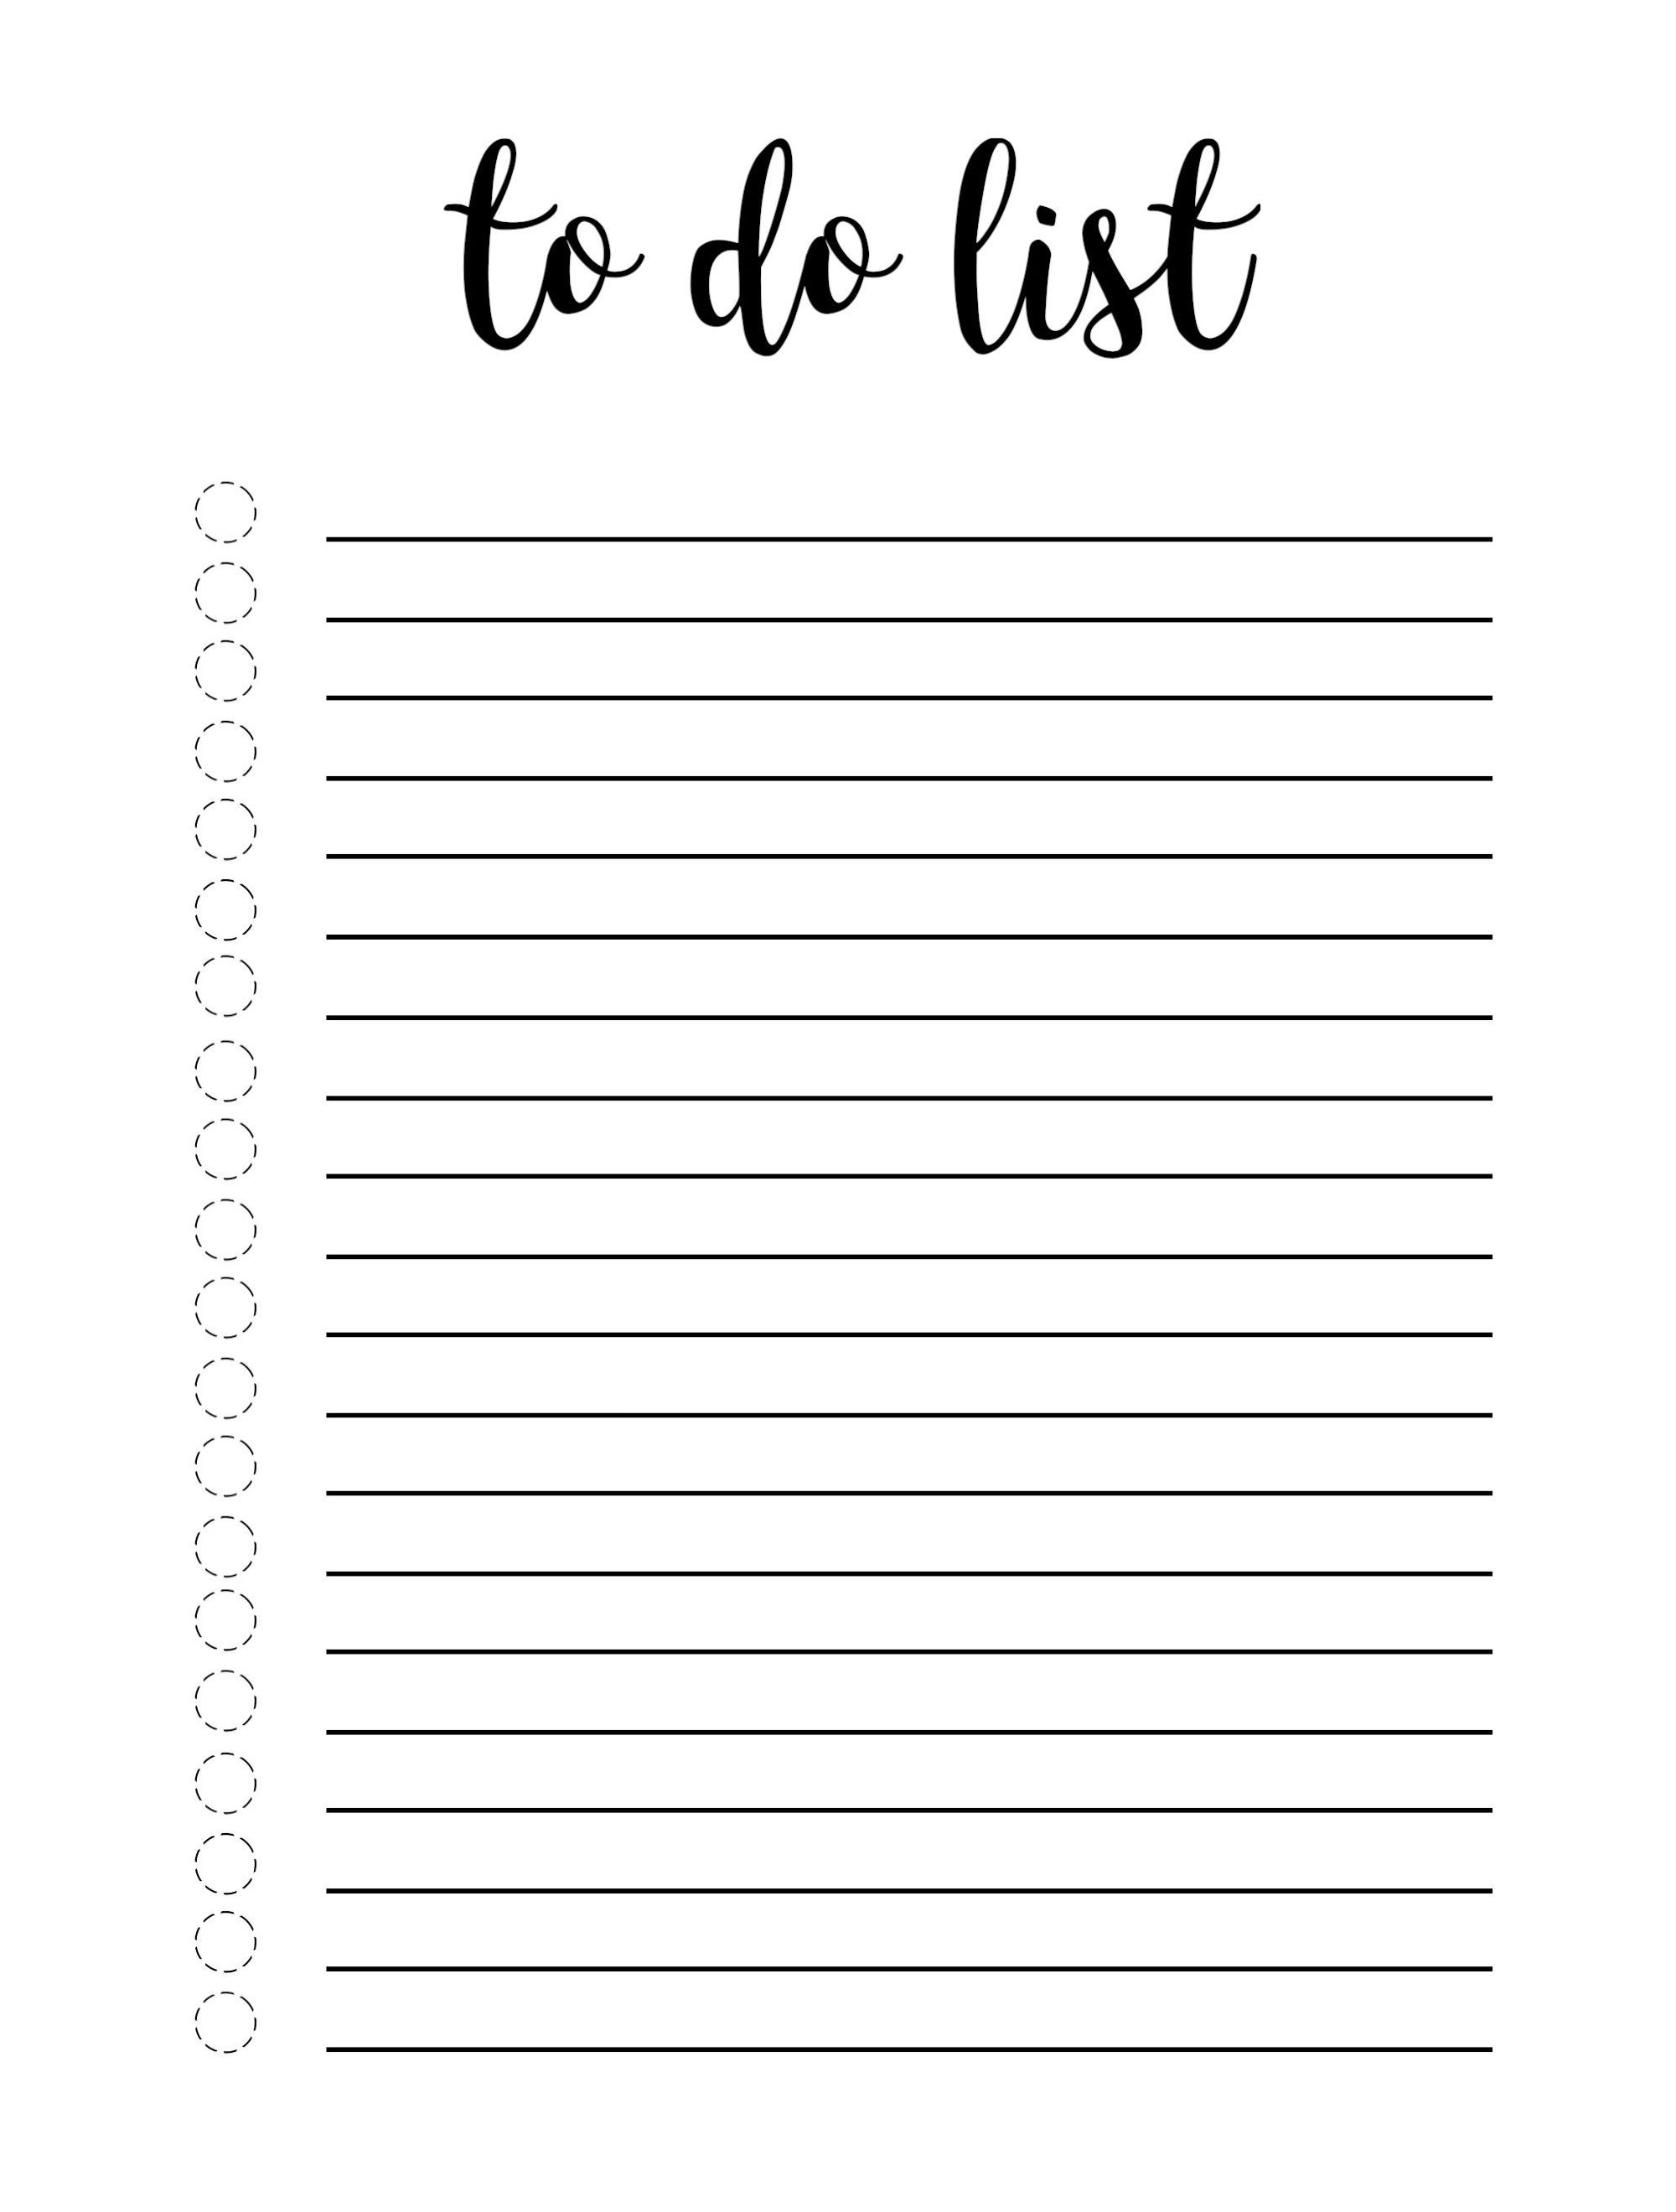 cute-to-do-list-template-word-excel-one-platform-for-digital-solutions-cute-to-do-list